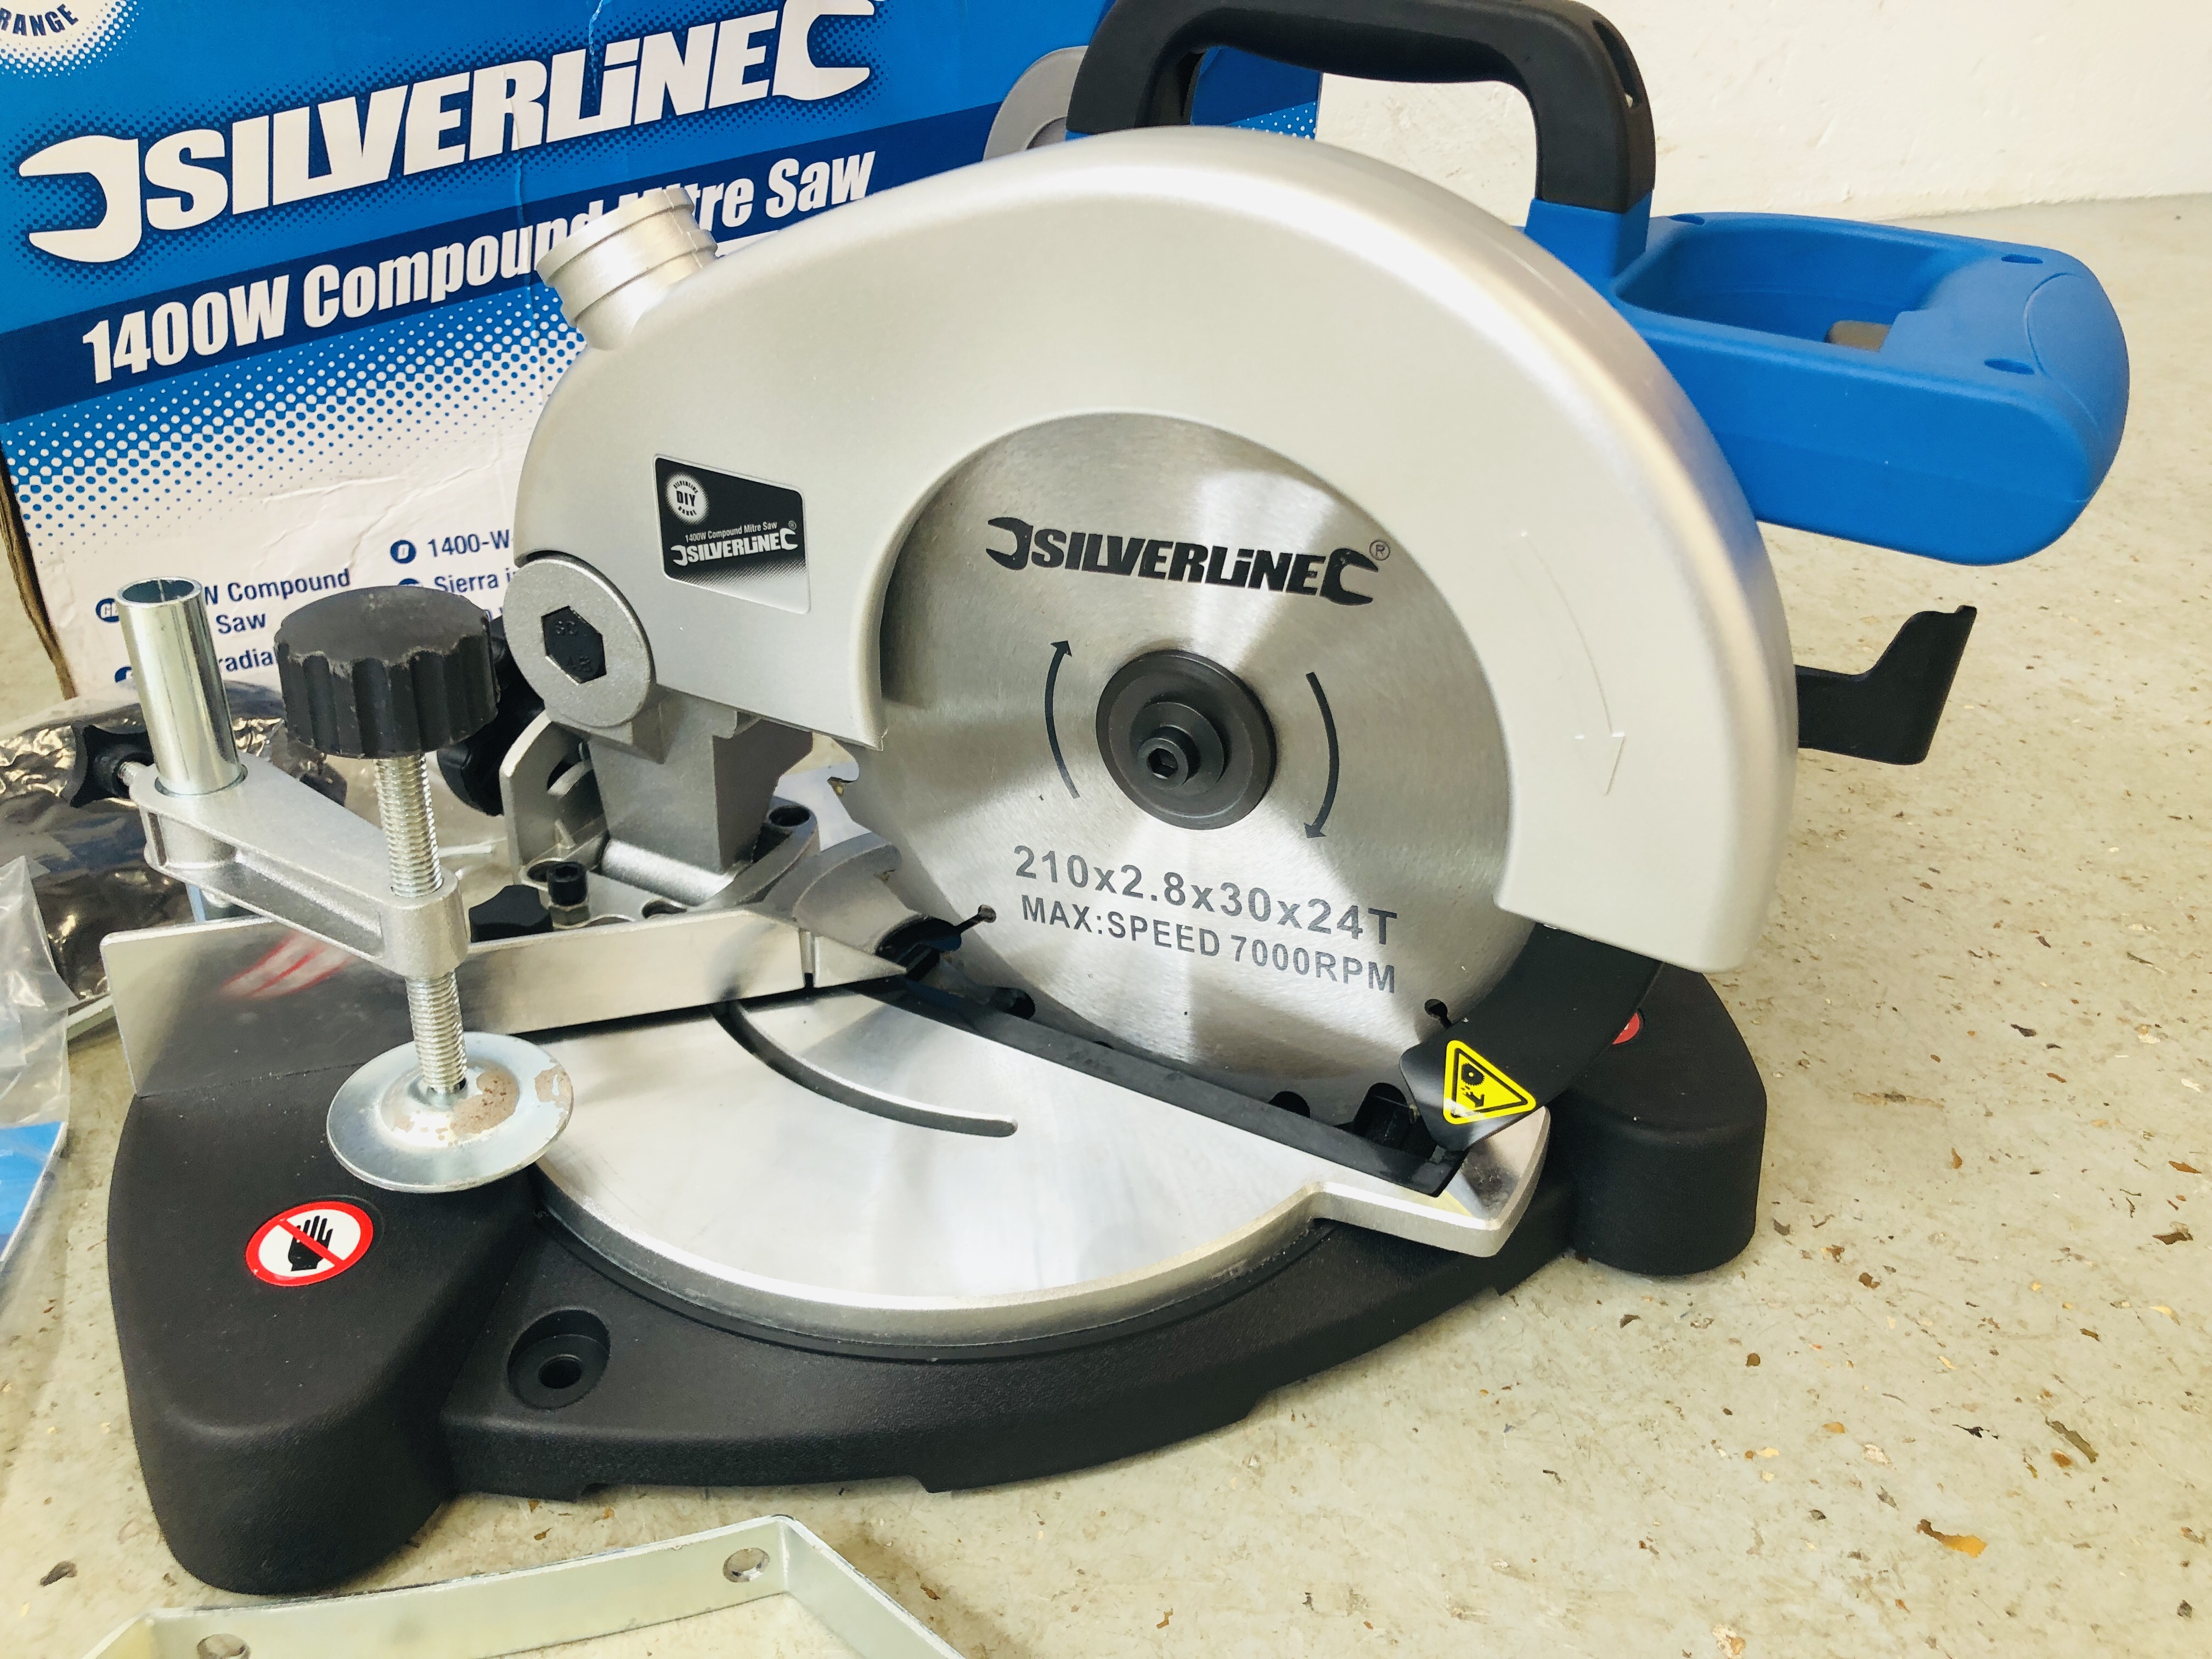 A SILVERLINE 210MM 1400W COMPOUND MITRE SAW (AS NEW) - SOLD AS SEEN. - Image 2 of 3